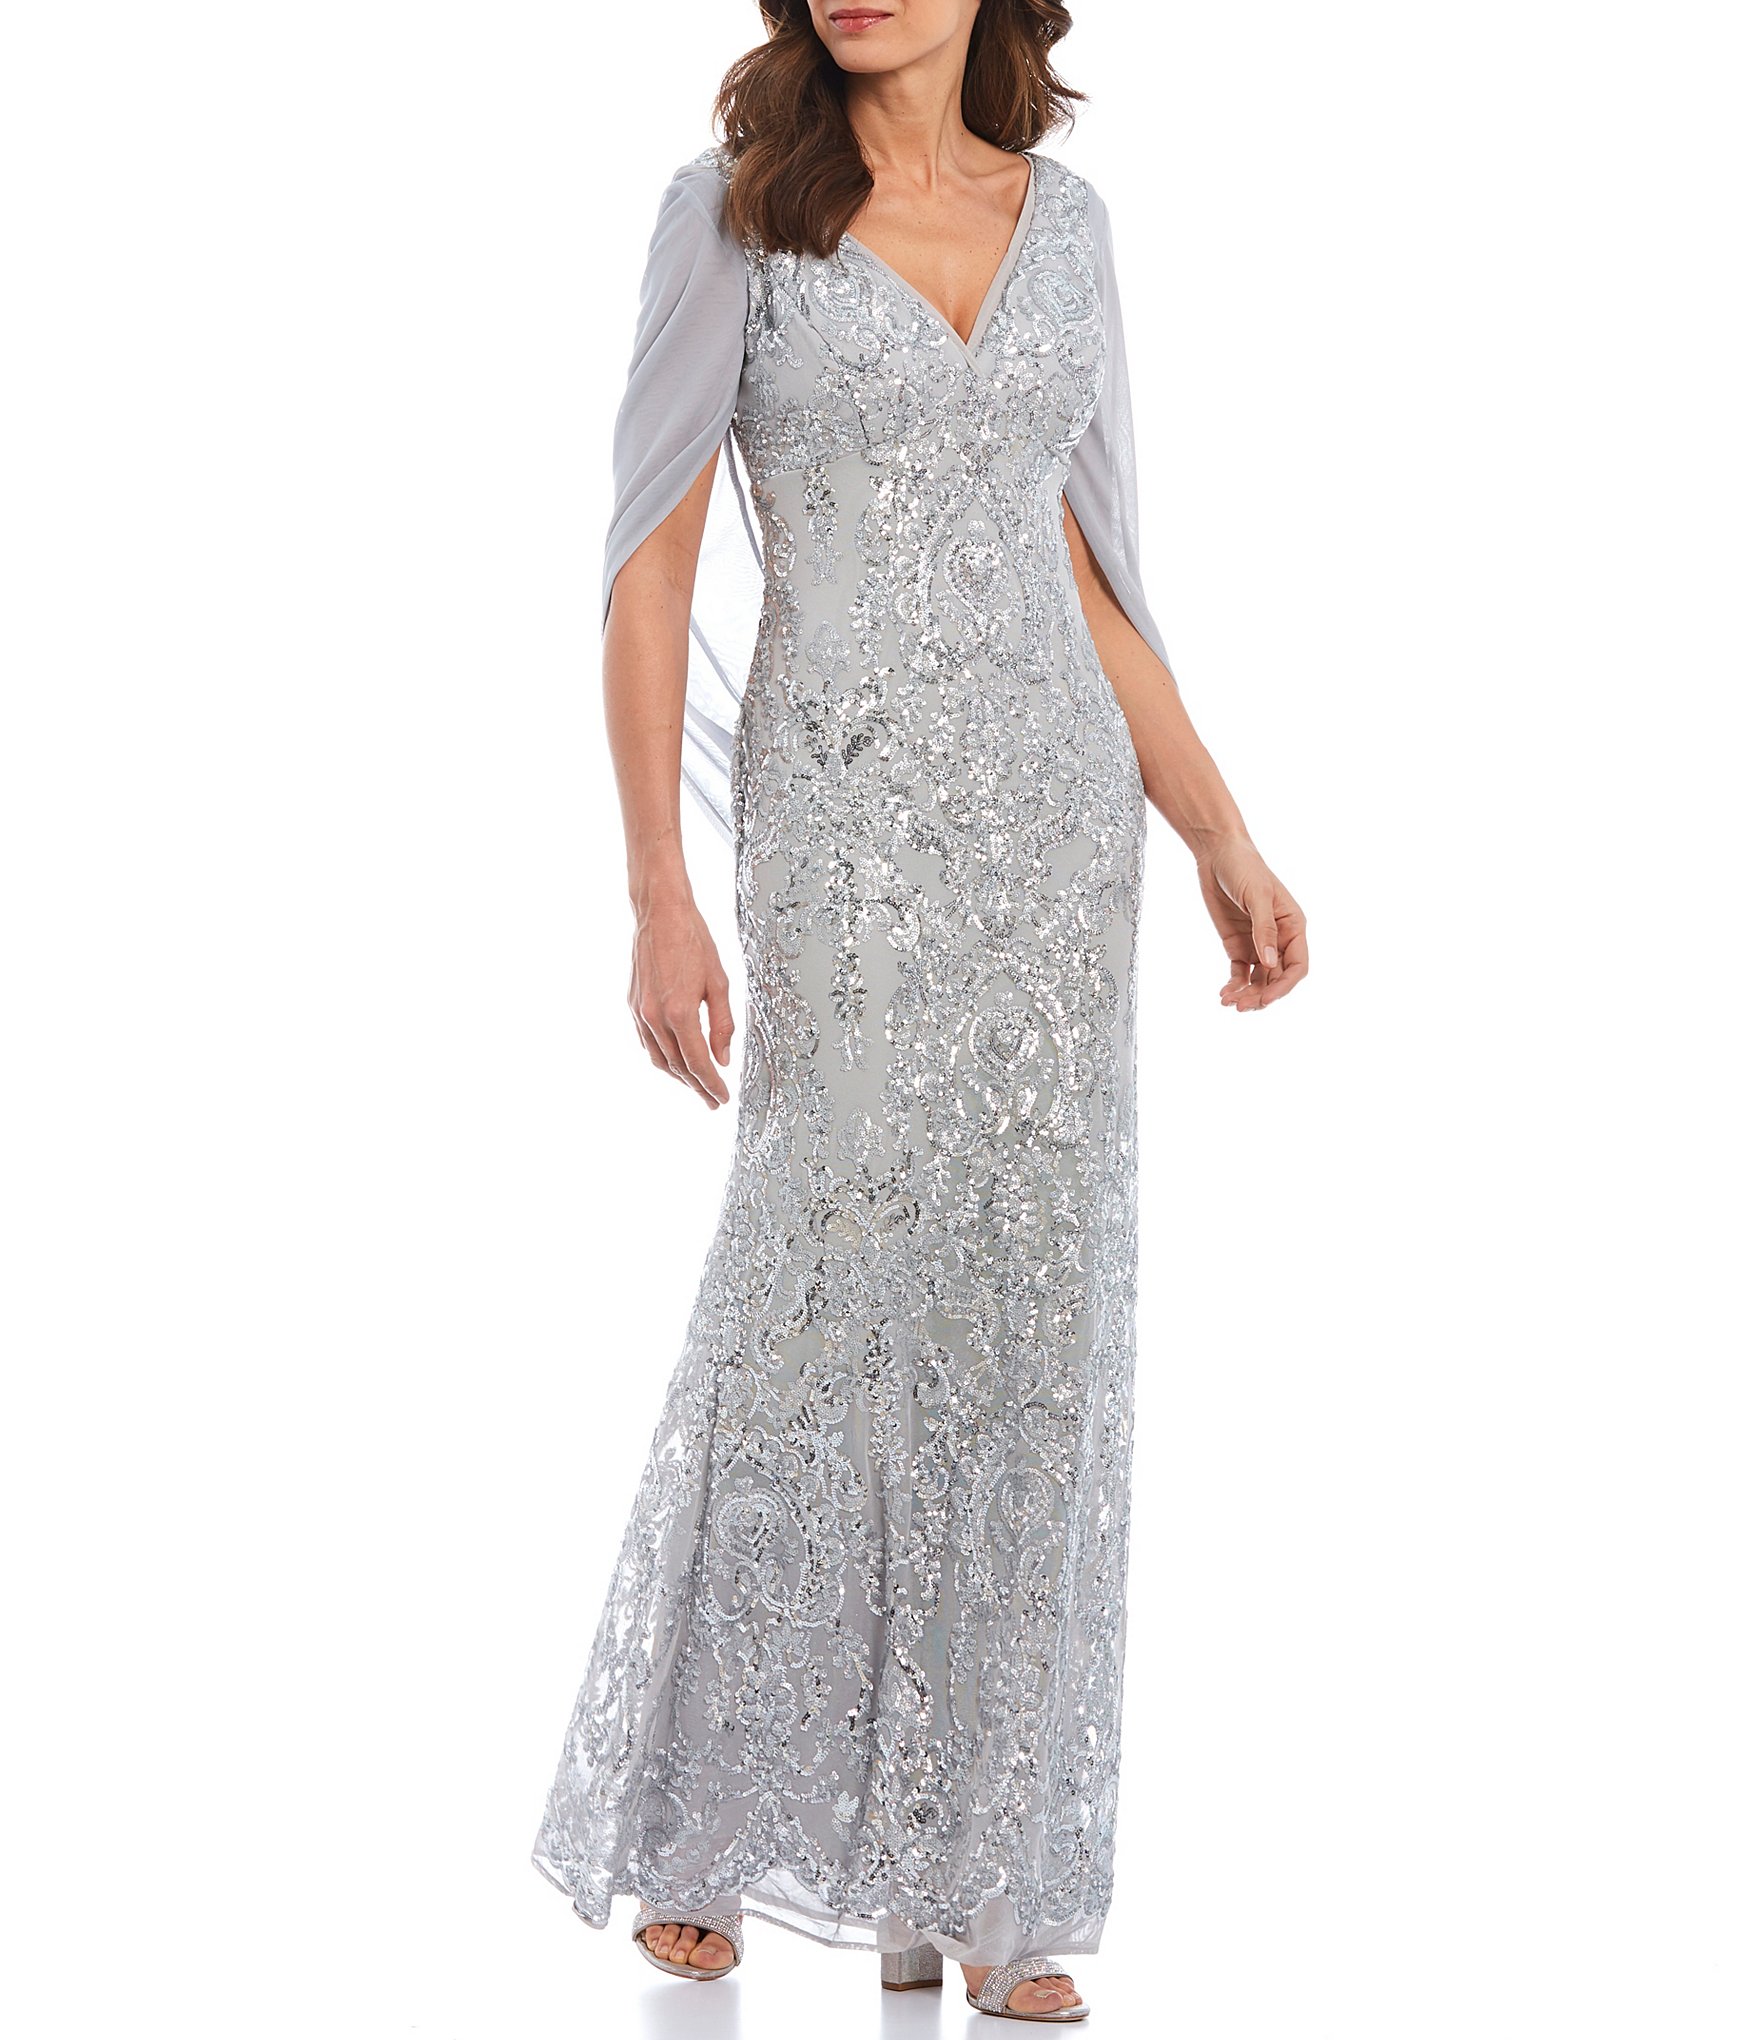 silver and gold evening gowns